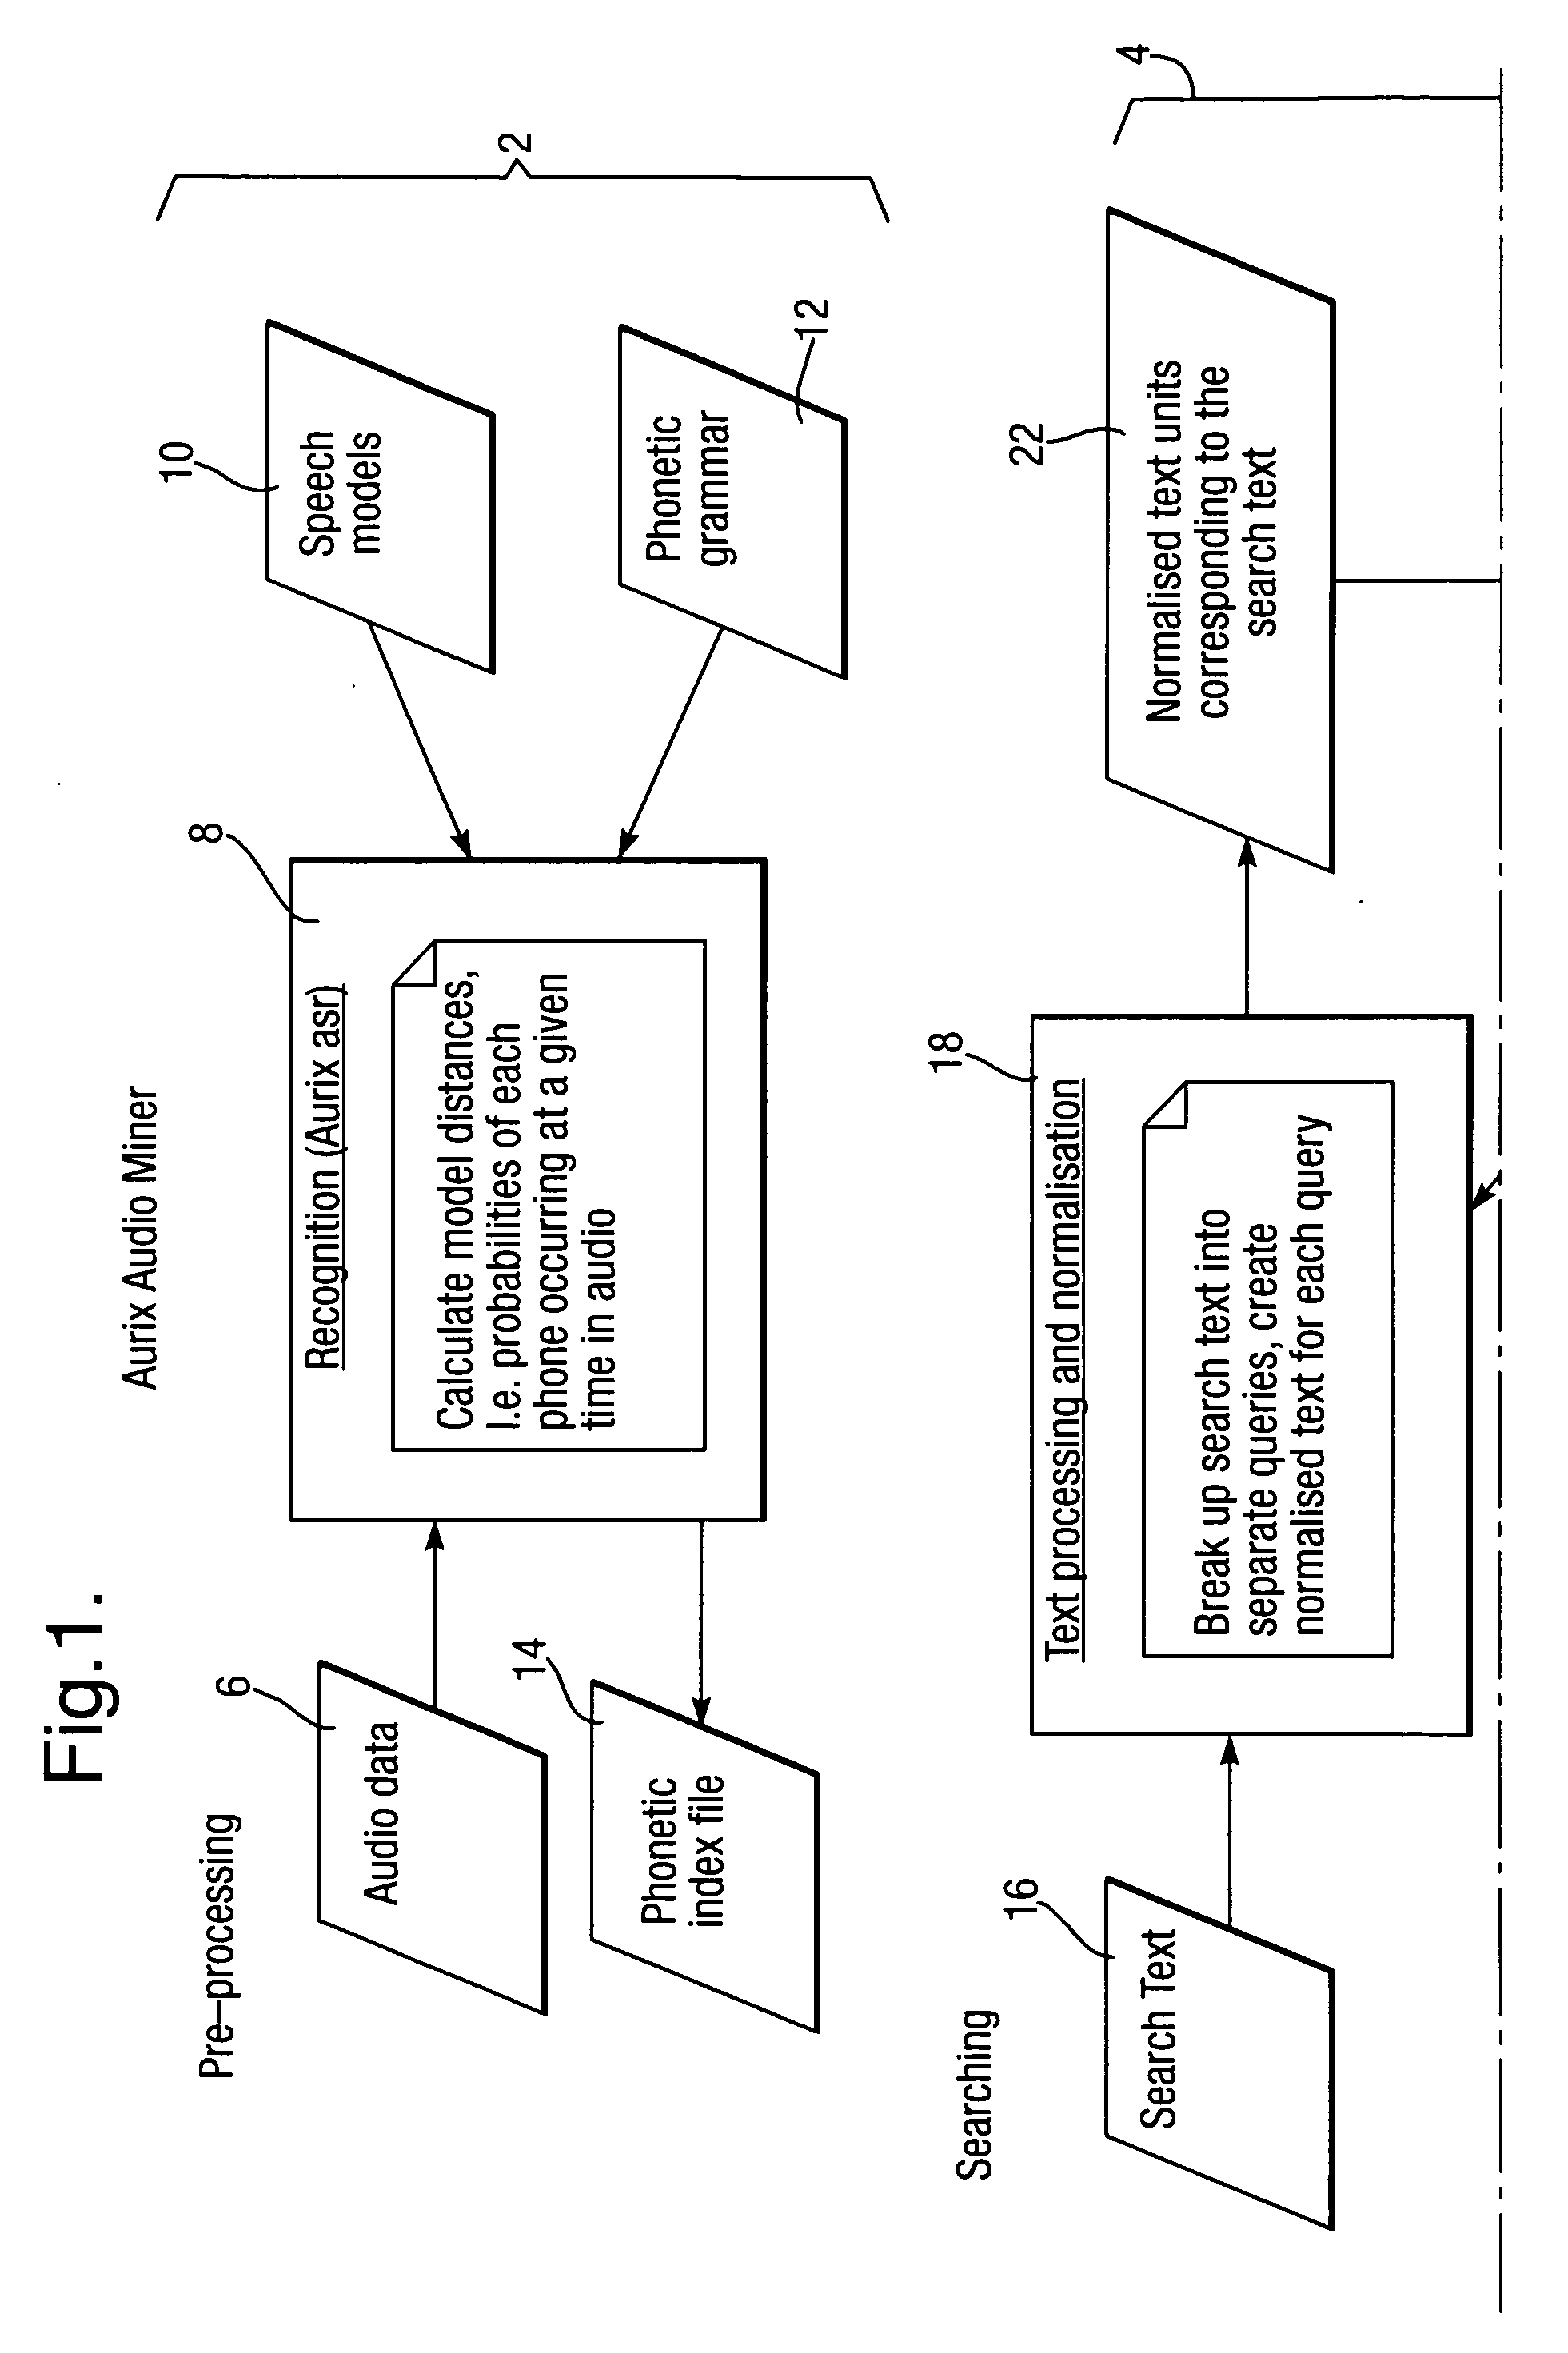 Methods and apparatus relating to searching of spoken audio data